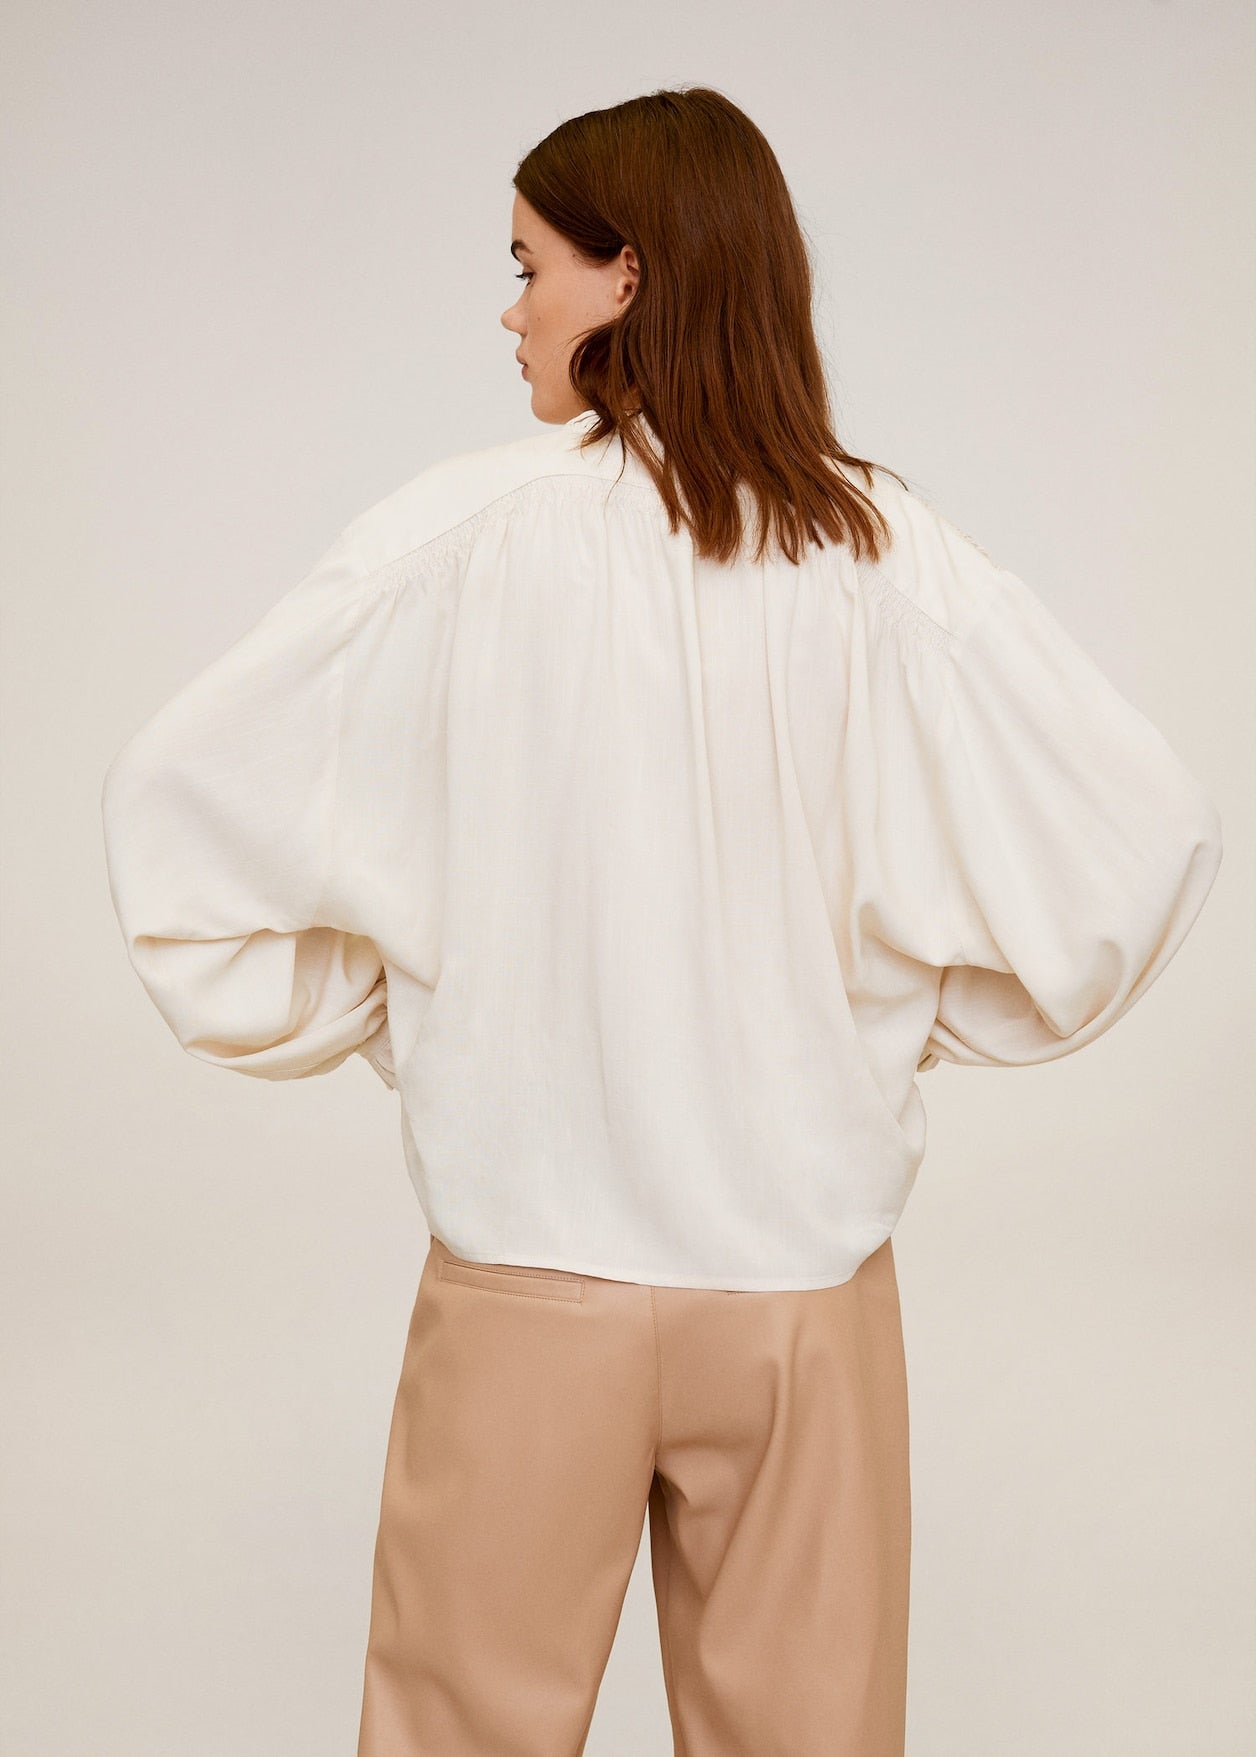 Gathered Details Blouse from Blouses collection you can buy now from Fashion And Icon online shop